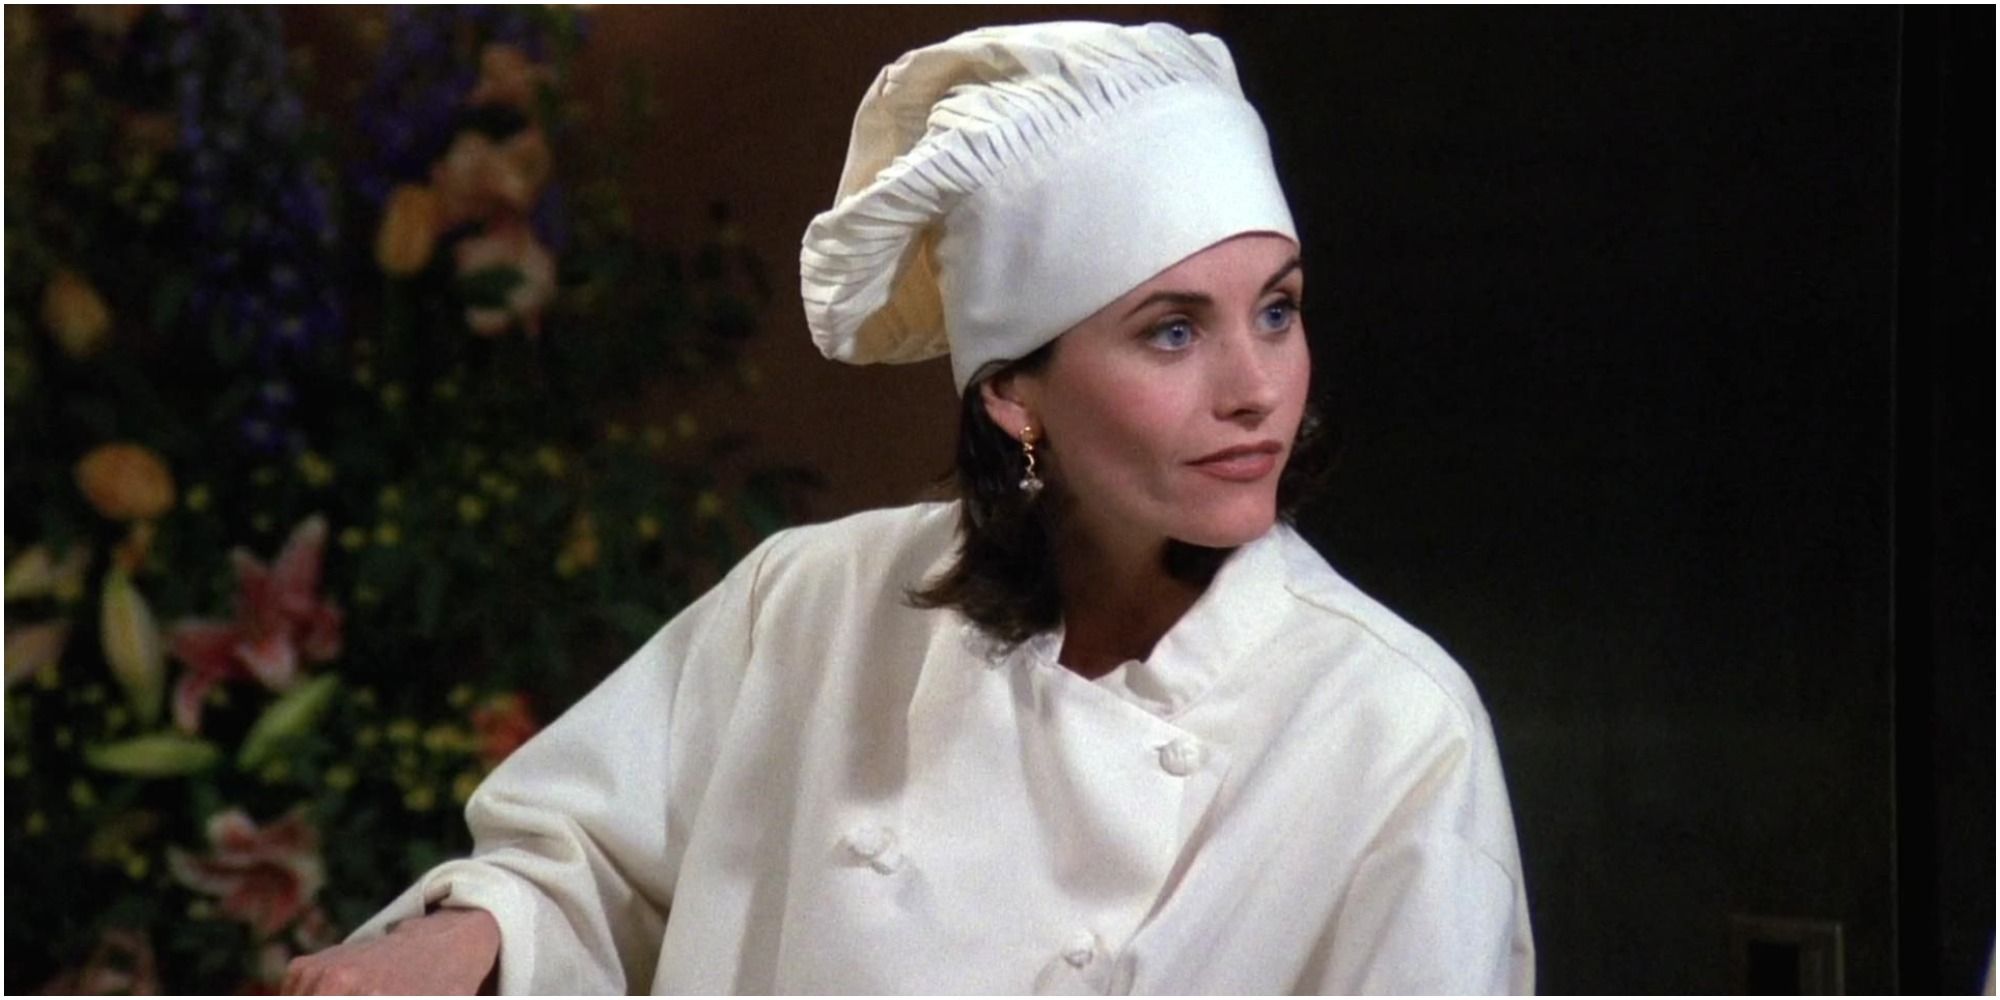 Monica wearing a chef's hat and outfit on Friends